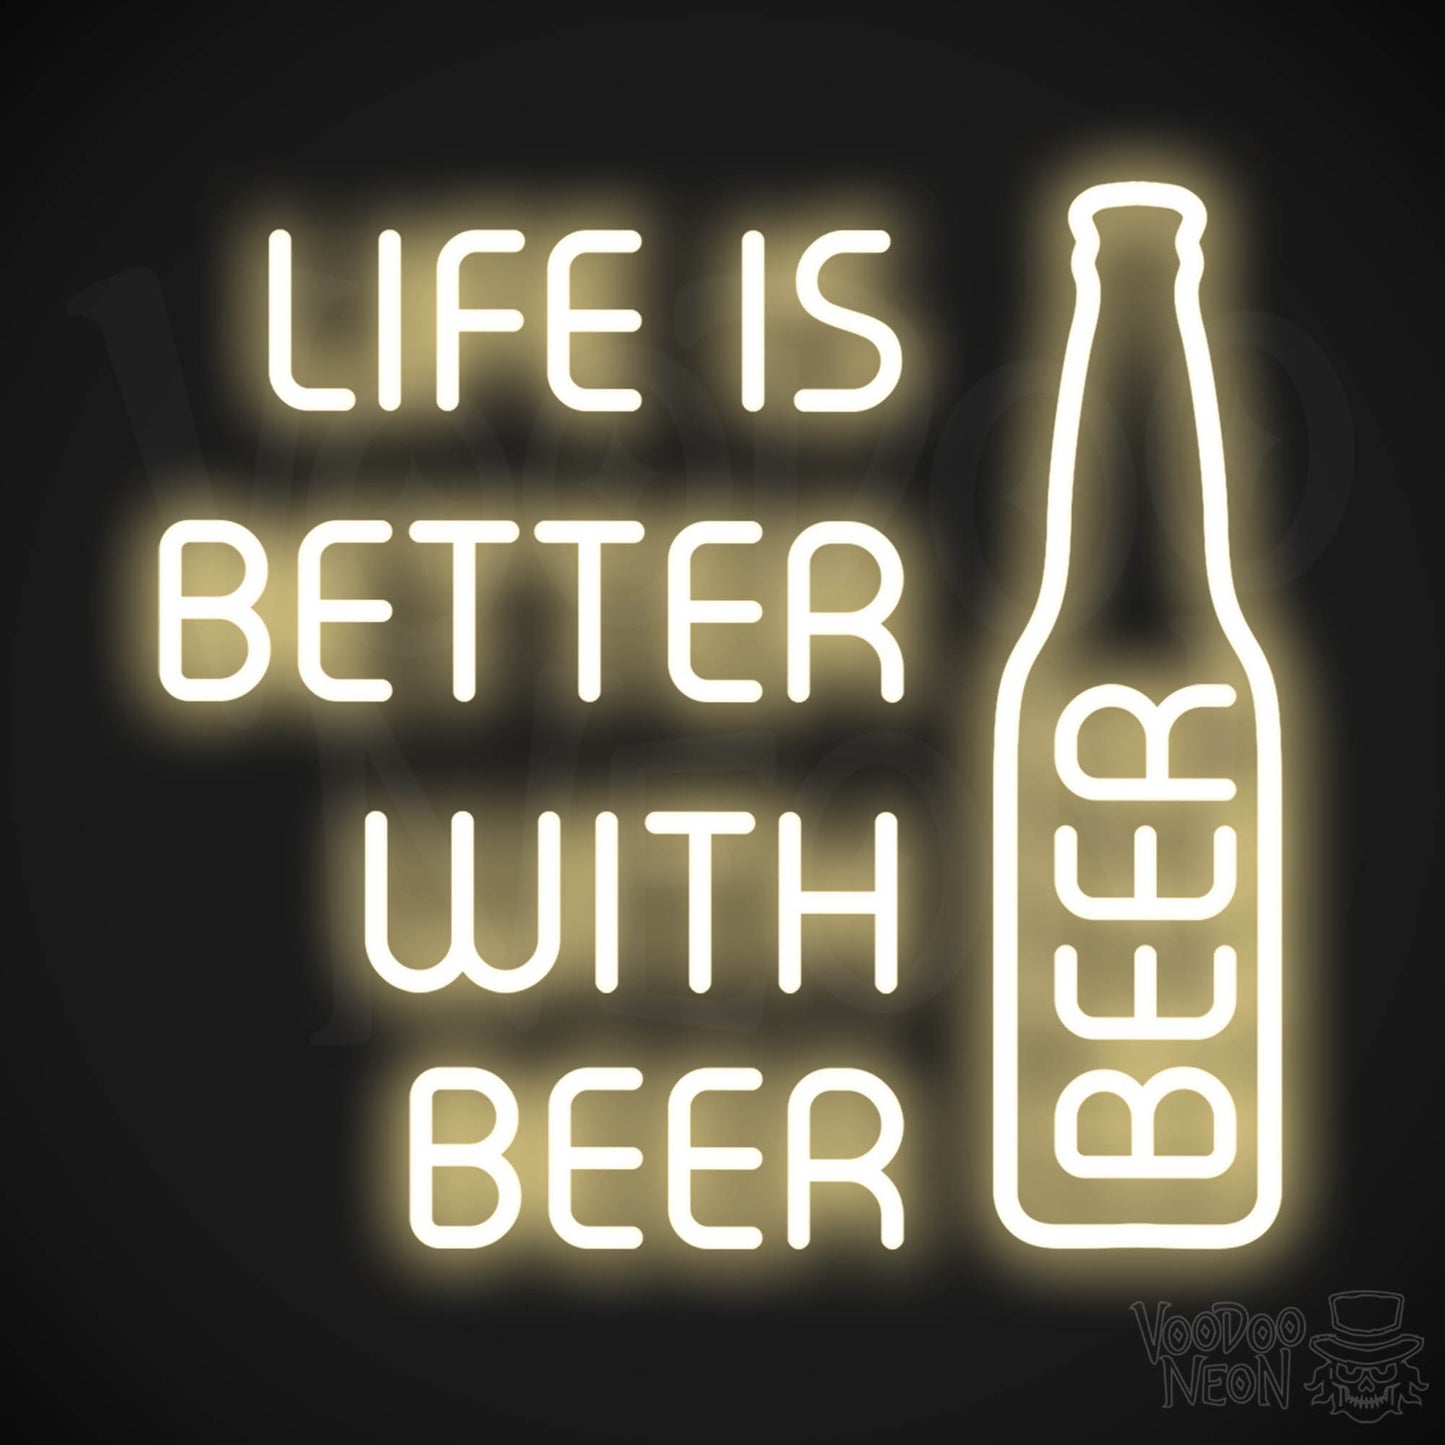 Life Is Better With Beer LED Neon - Warm White